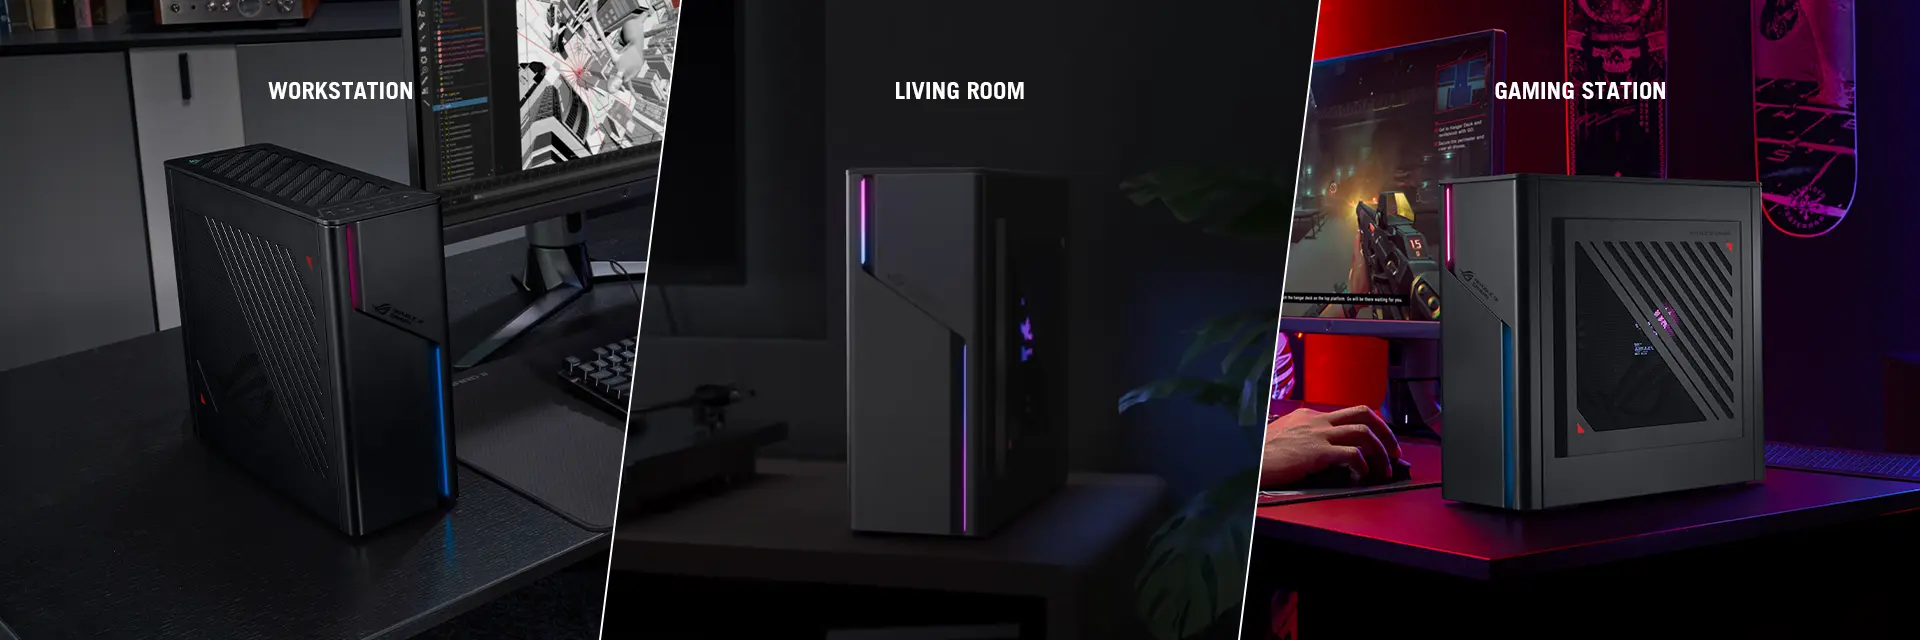 From left to right, ROG G22CH as workstation desktop, ROG G22CH as living room desktop and ROG G22CH as gaming desktop.